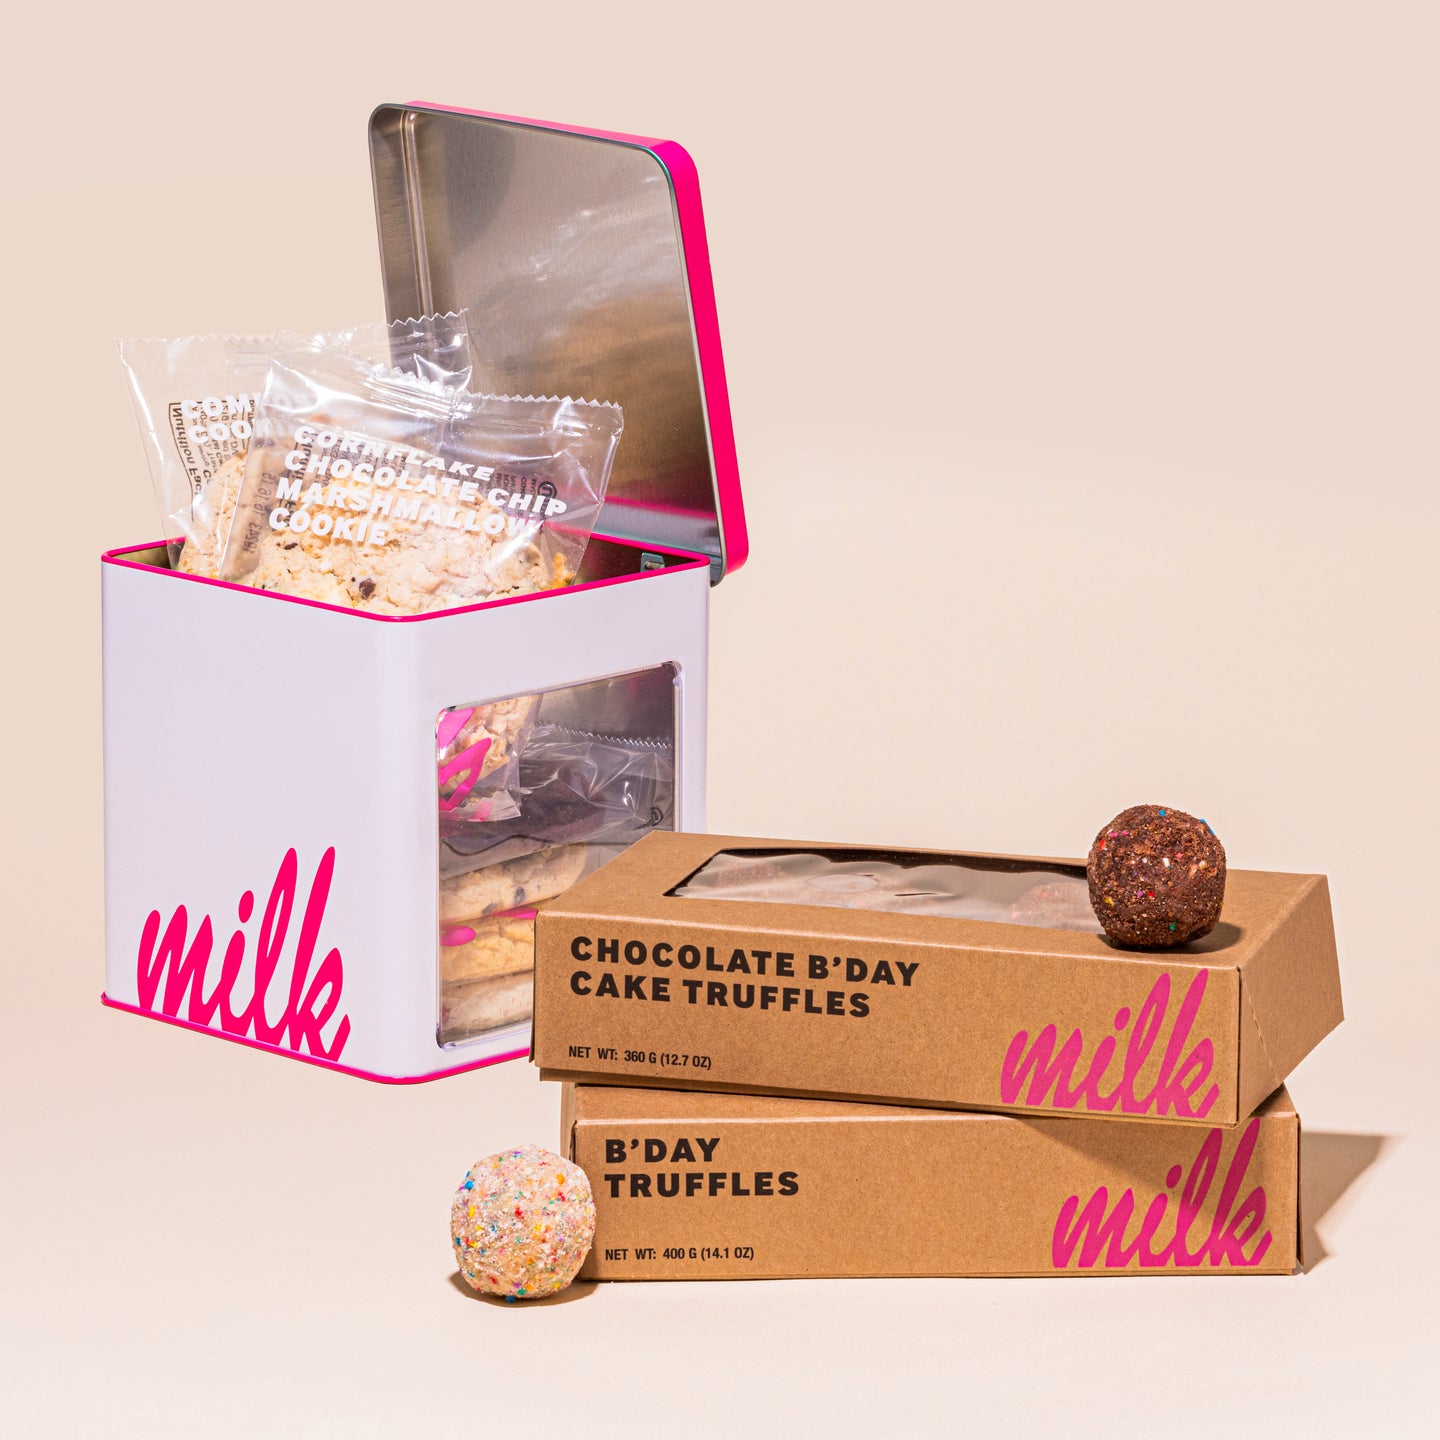 Delivery Gifts - Edible Gifts Delivered